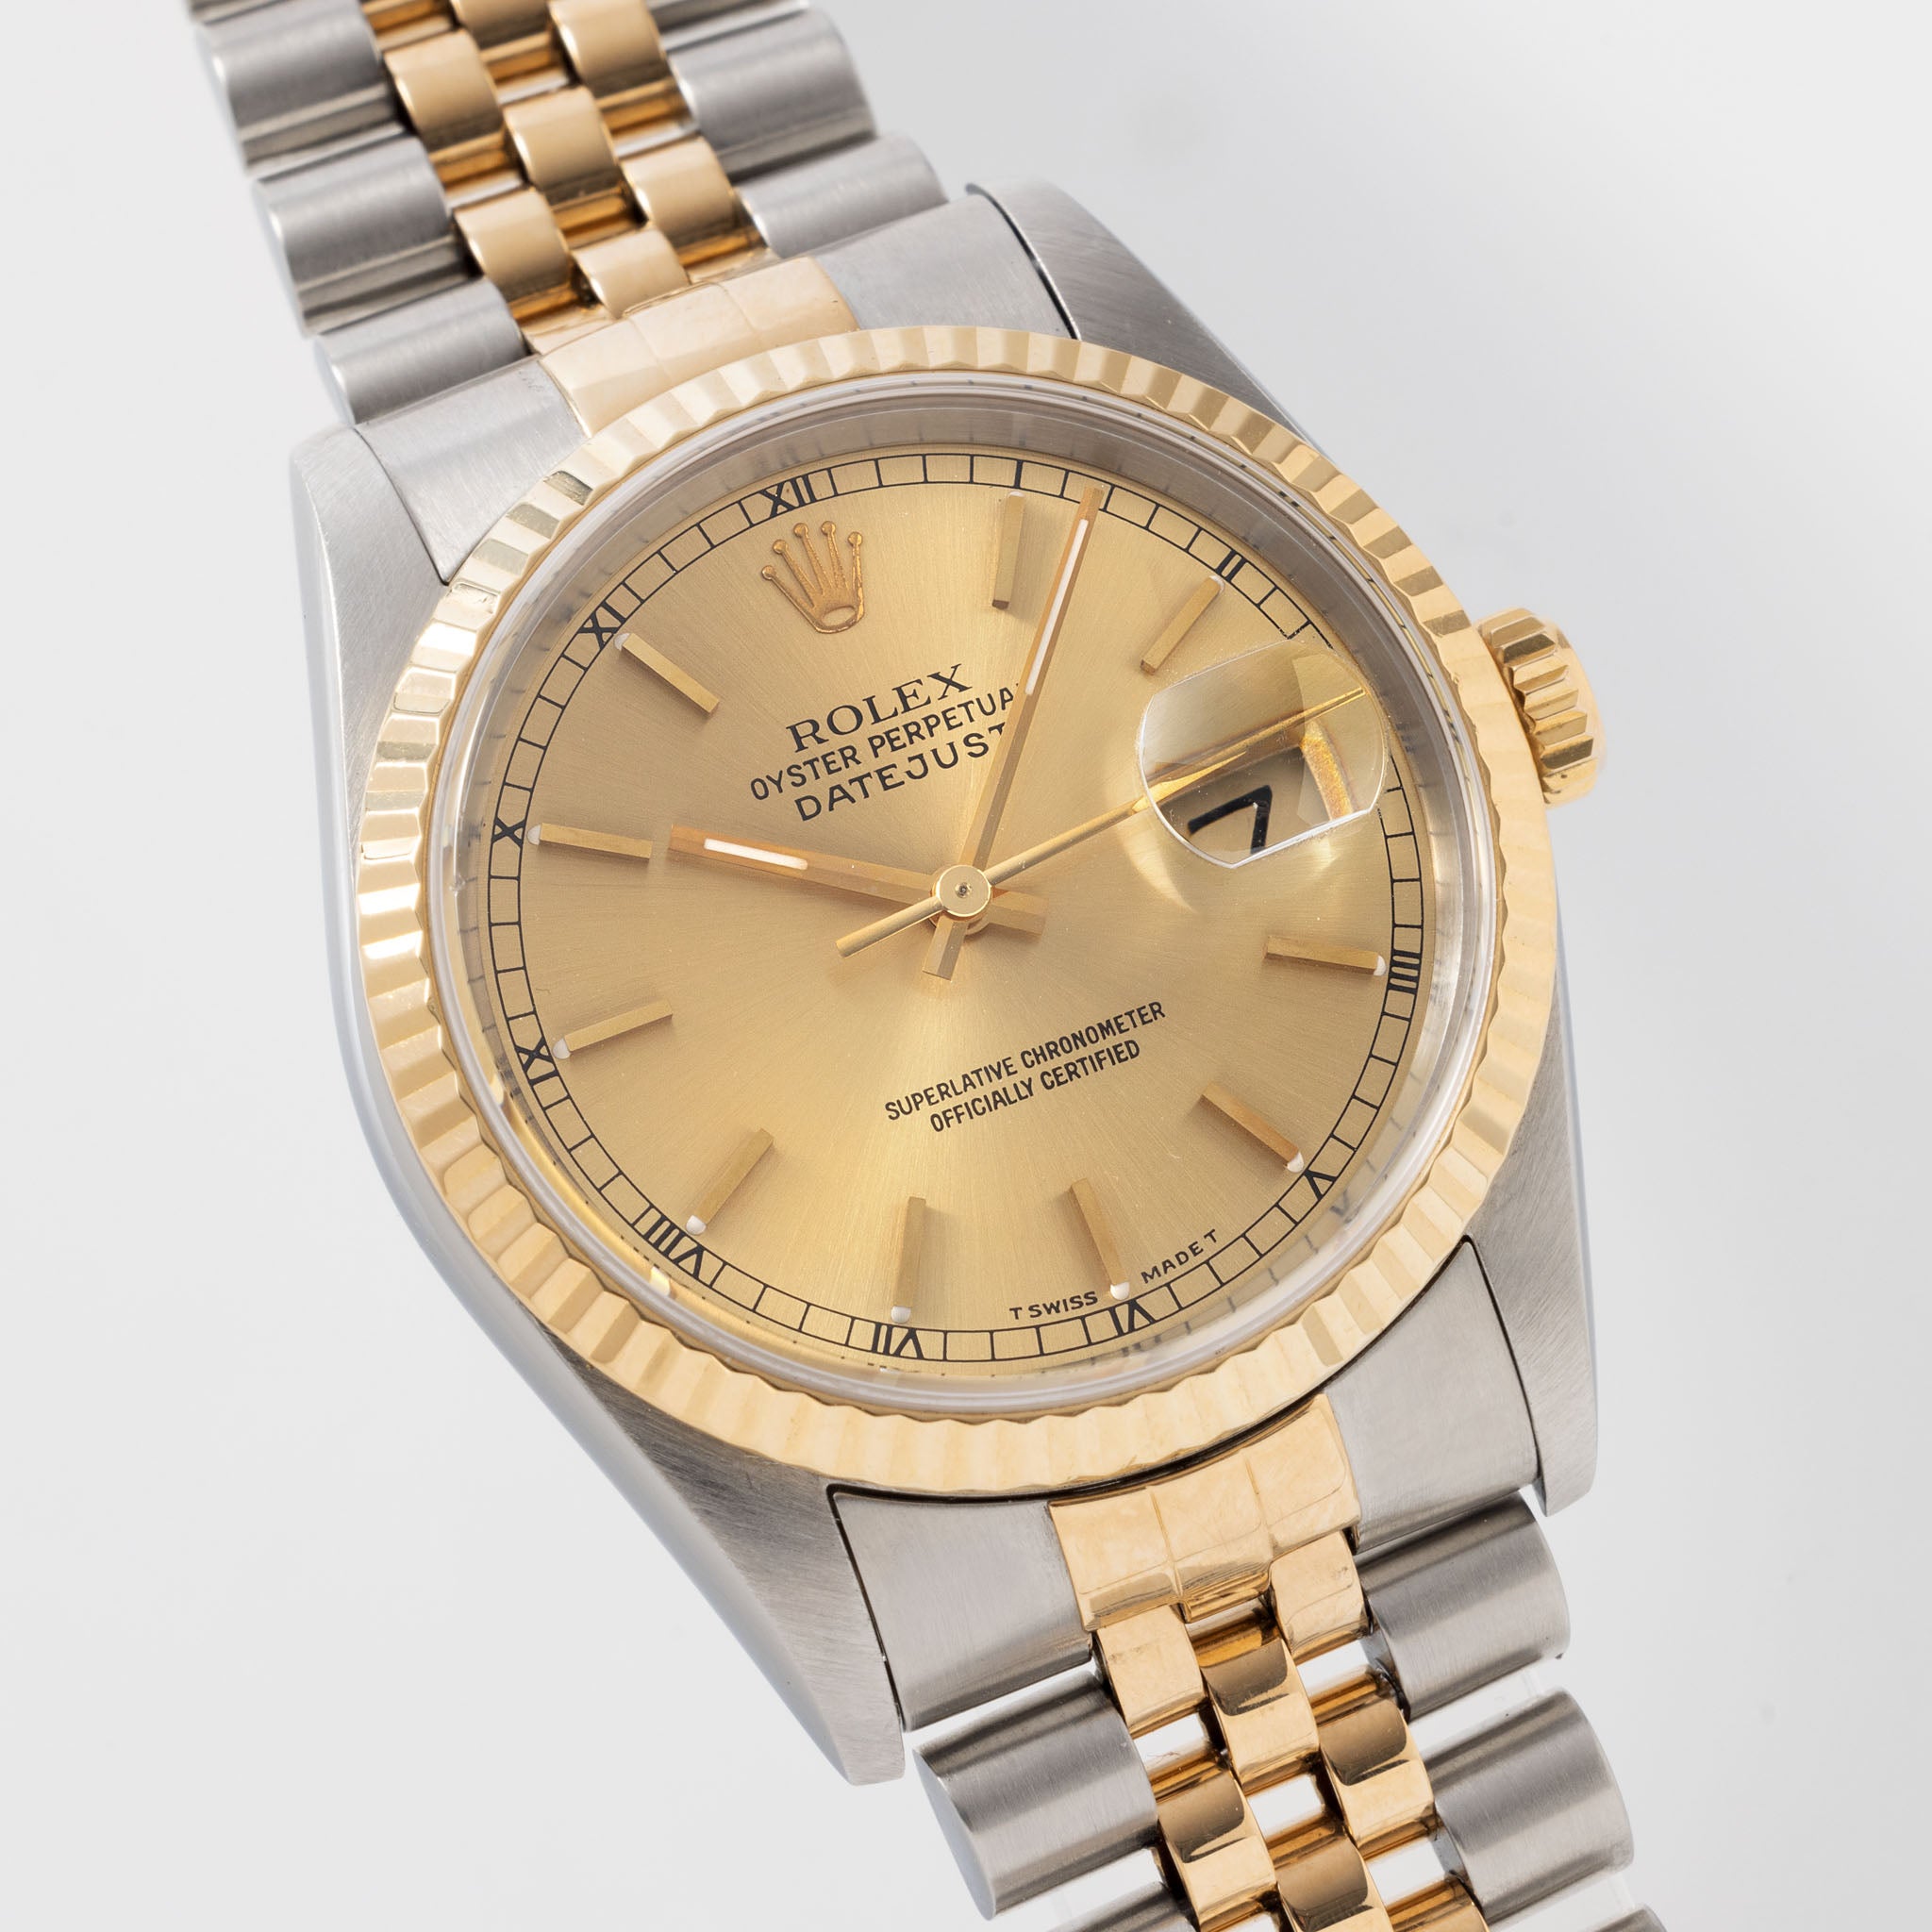 Rolex Datejust Steel and Gold Champagne Dial Box and Papers Ref 16233